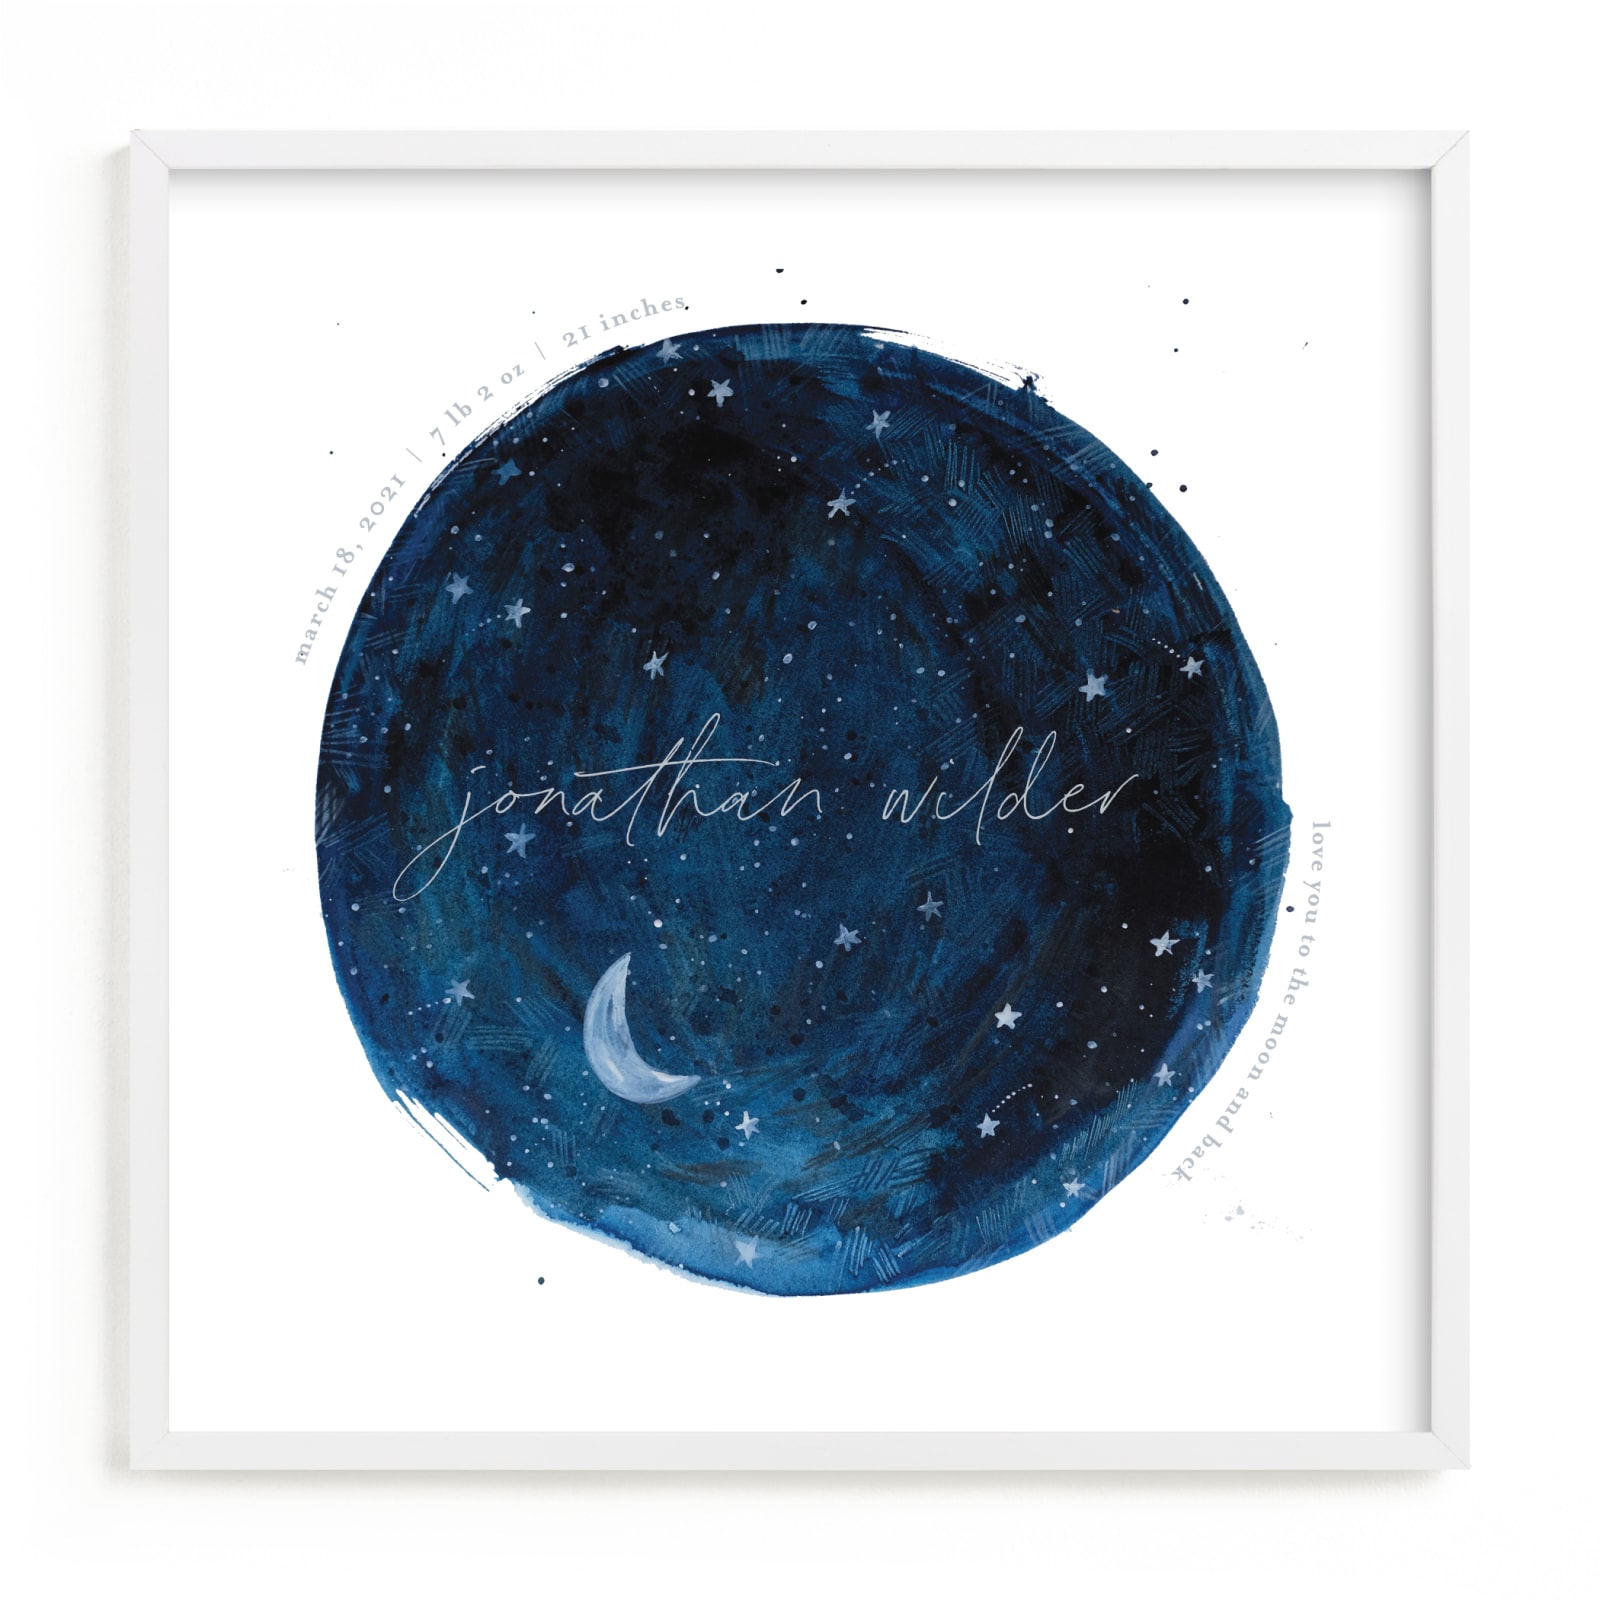 This is a blue nursery wall art by Krissy Bengtson called Lunar.